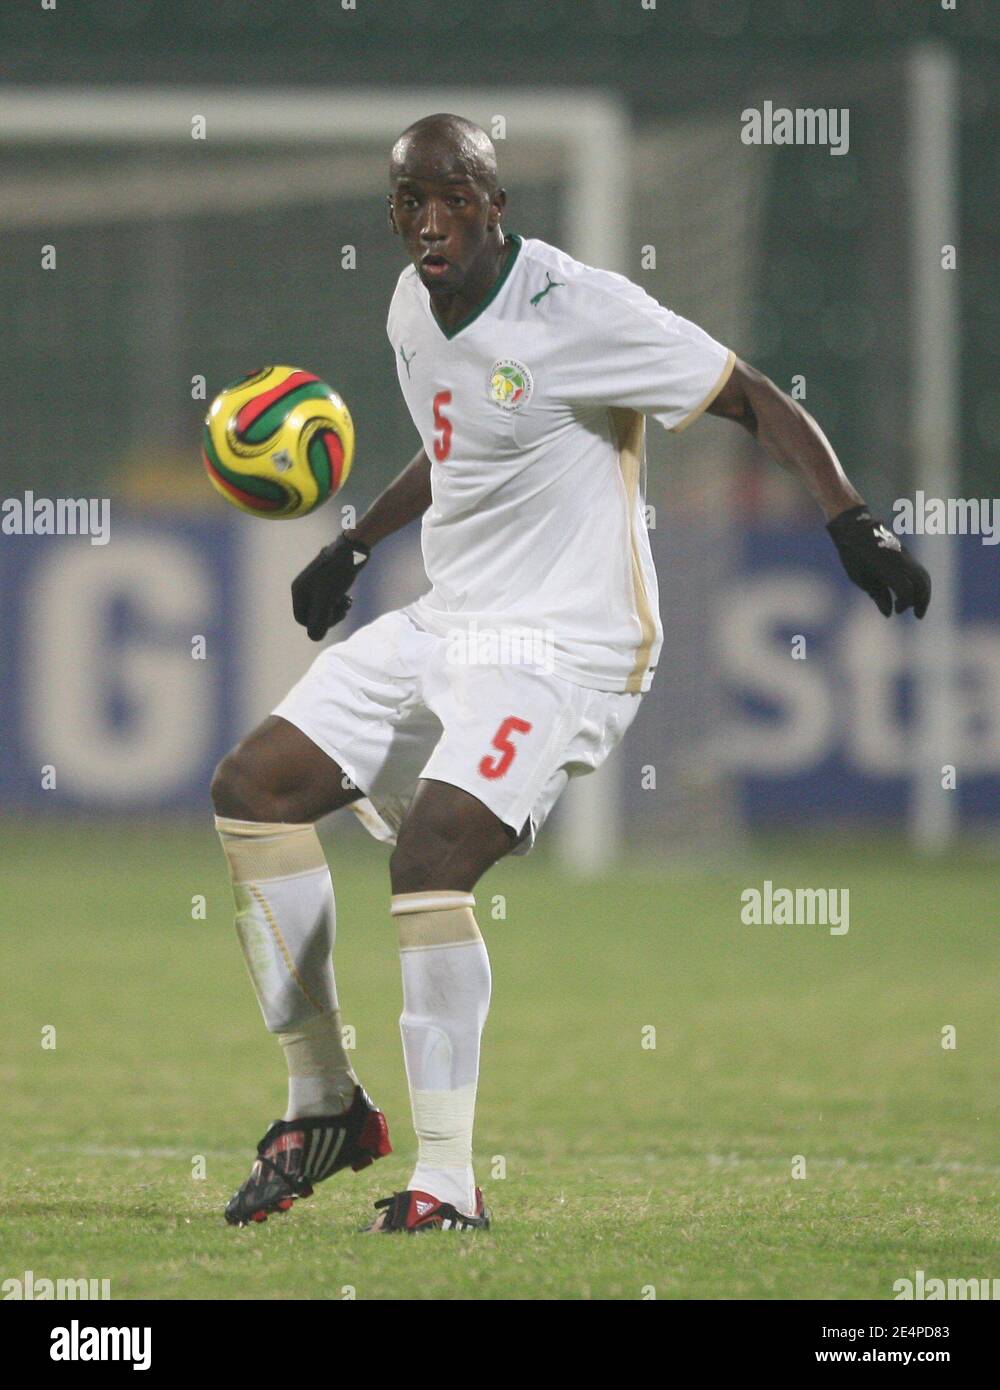 Senegal's Souleymane Diawara during the African Cup of Nations soccer match, Senegal vs South Africa in Kumasi, Ghana on January 31, 2008. The match ended in a 1-1 draw. Senegal failed to qualify for the next round of the competition. Photo by Steeve McMay/Cameleon/ABACAPRESS.COM Stock Photo